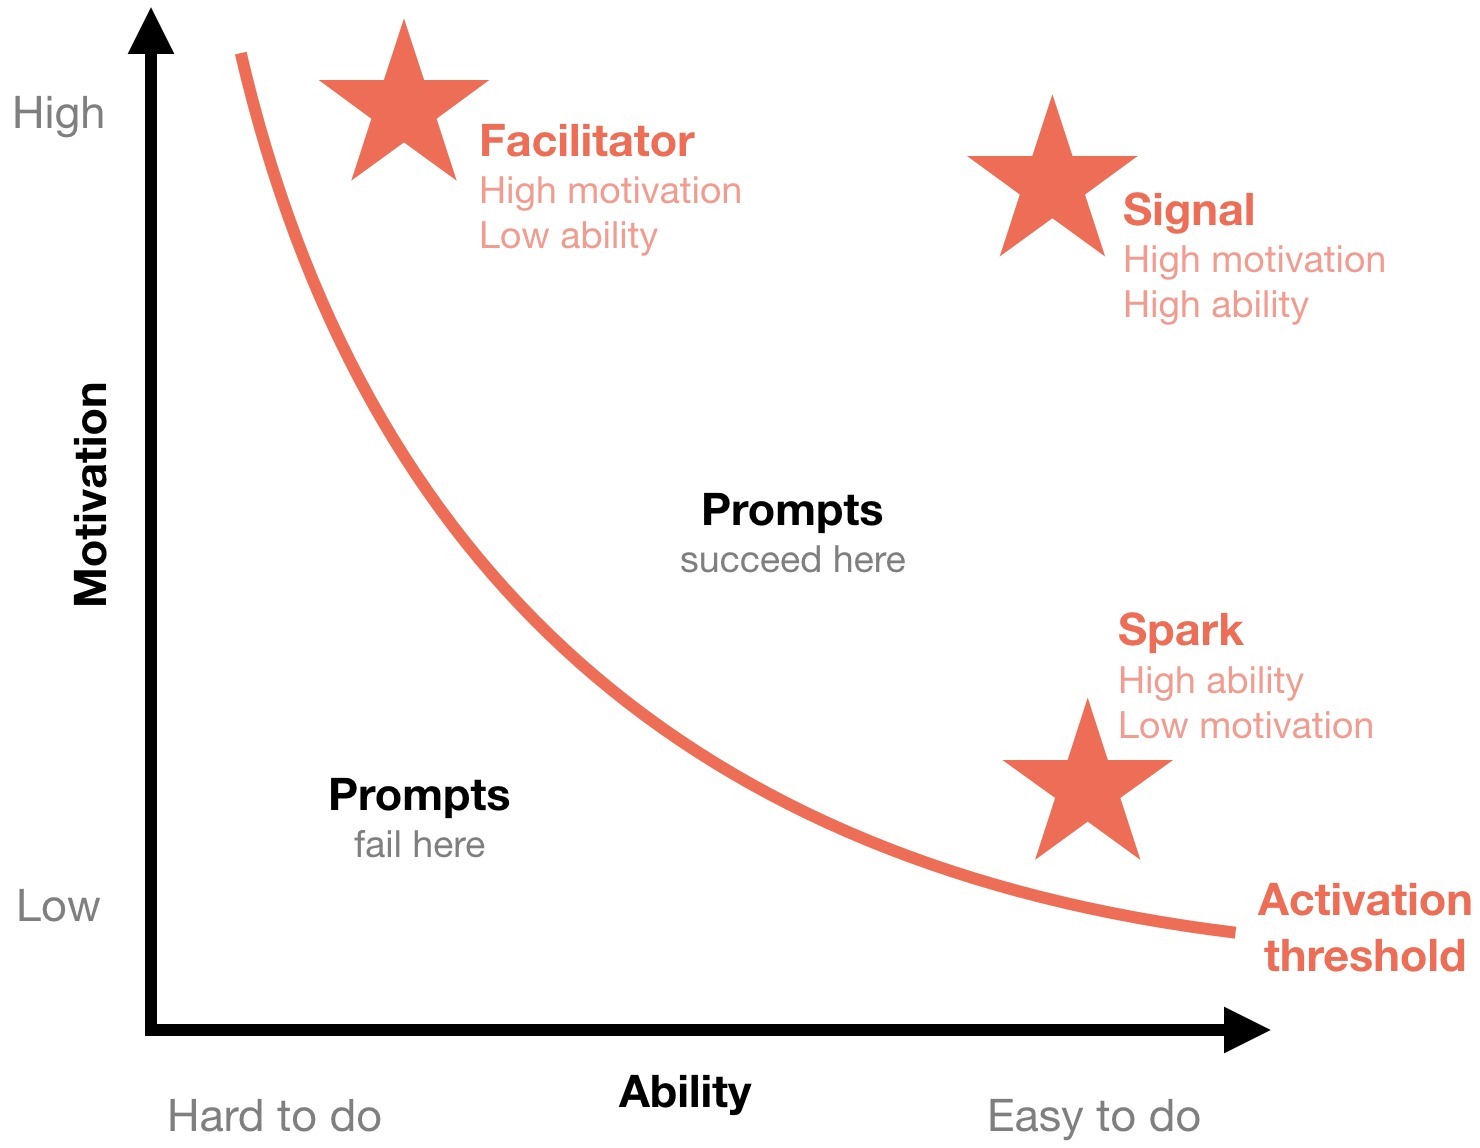 BJ Fogg outlines three types of prompts, facilitators, sparks, and signals.